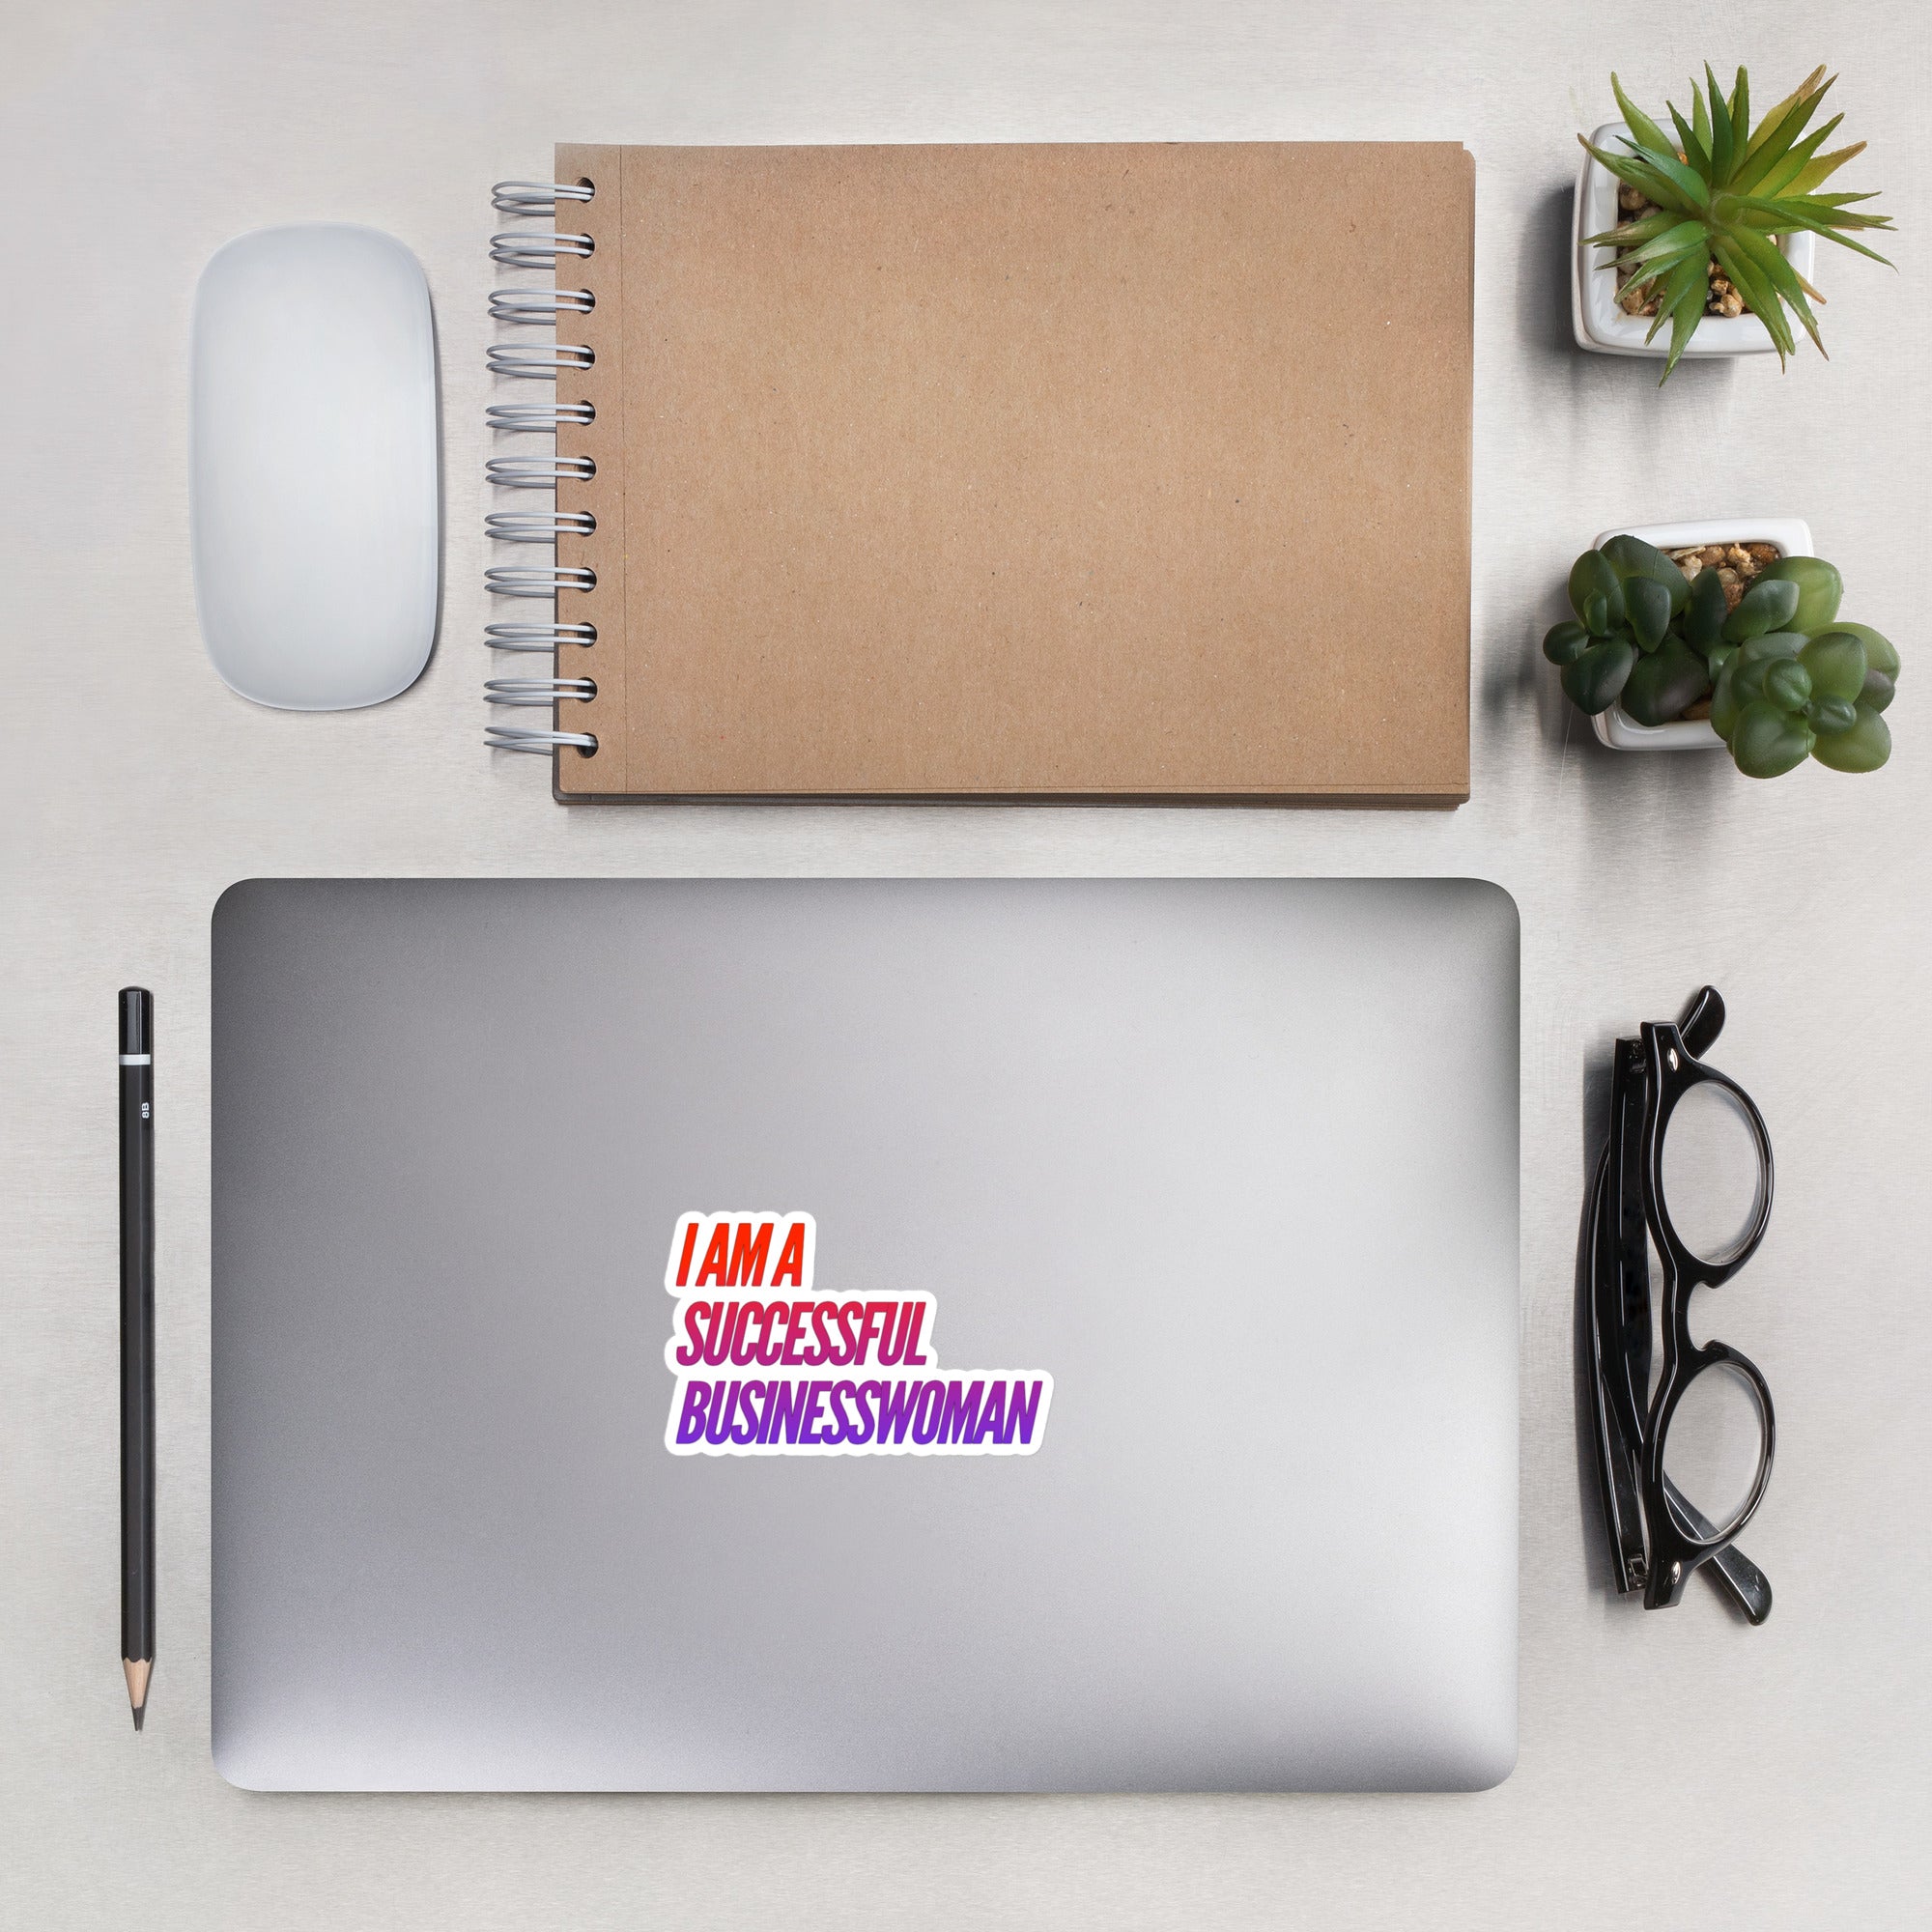 GloWell Designs - Bubble-Free Stickers - Affirmation Quote - I Am a Successful Businesswoman - GloWell Designs